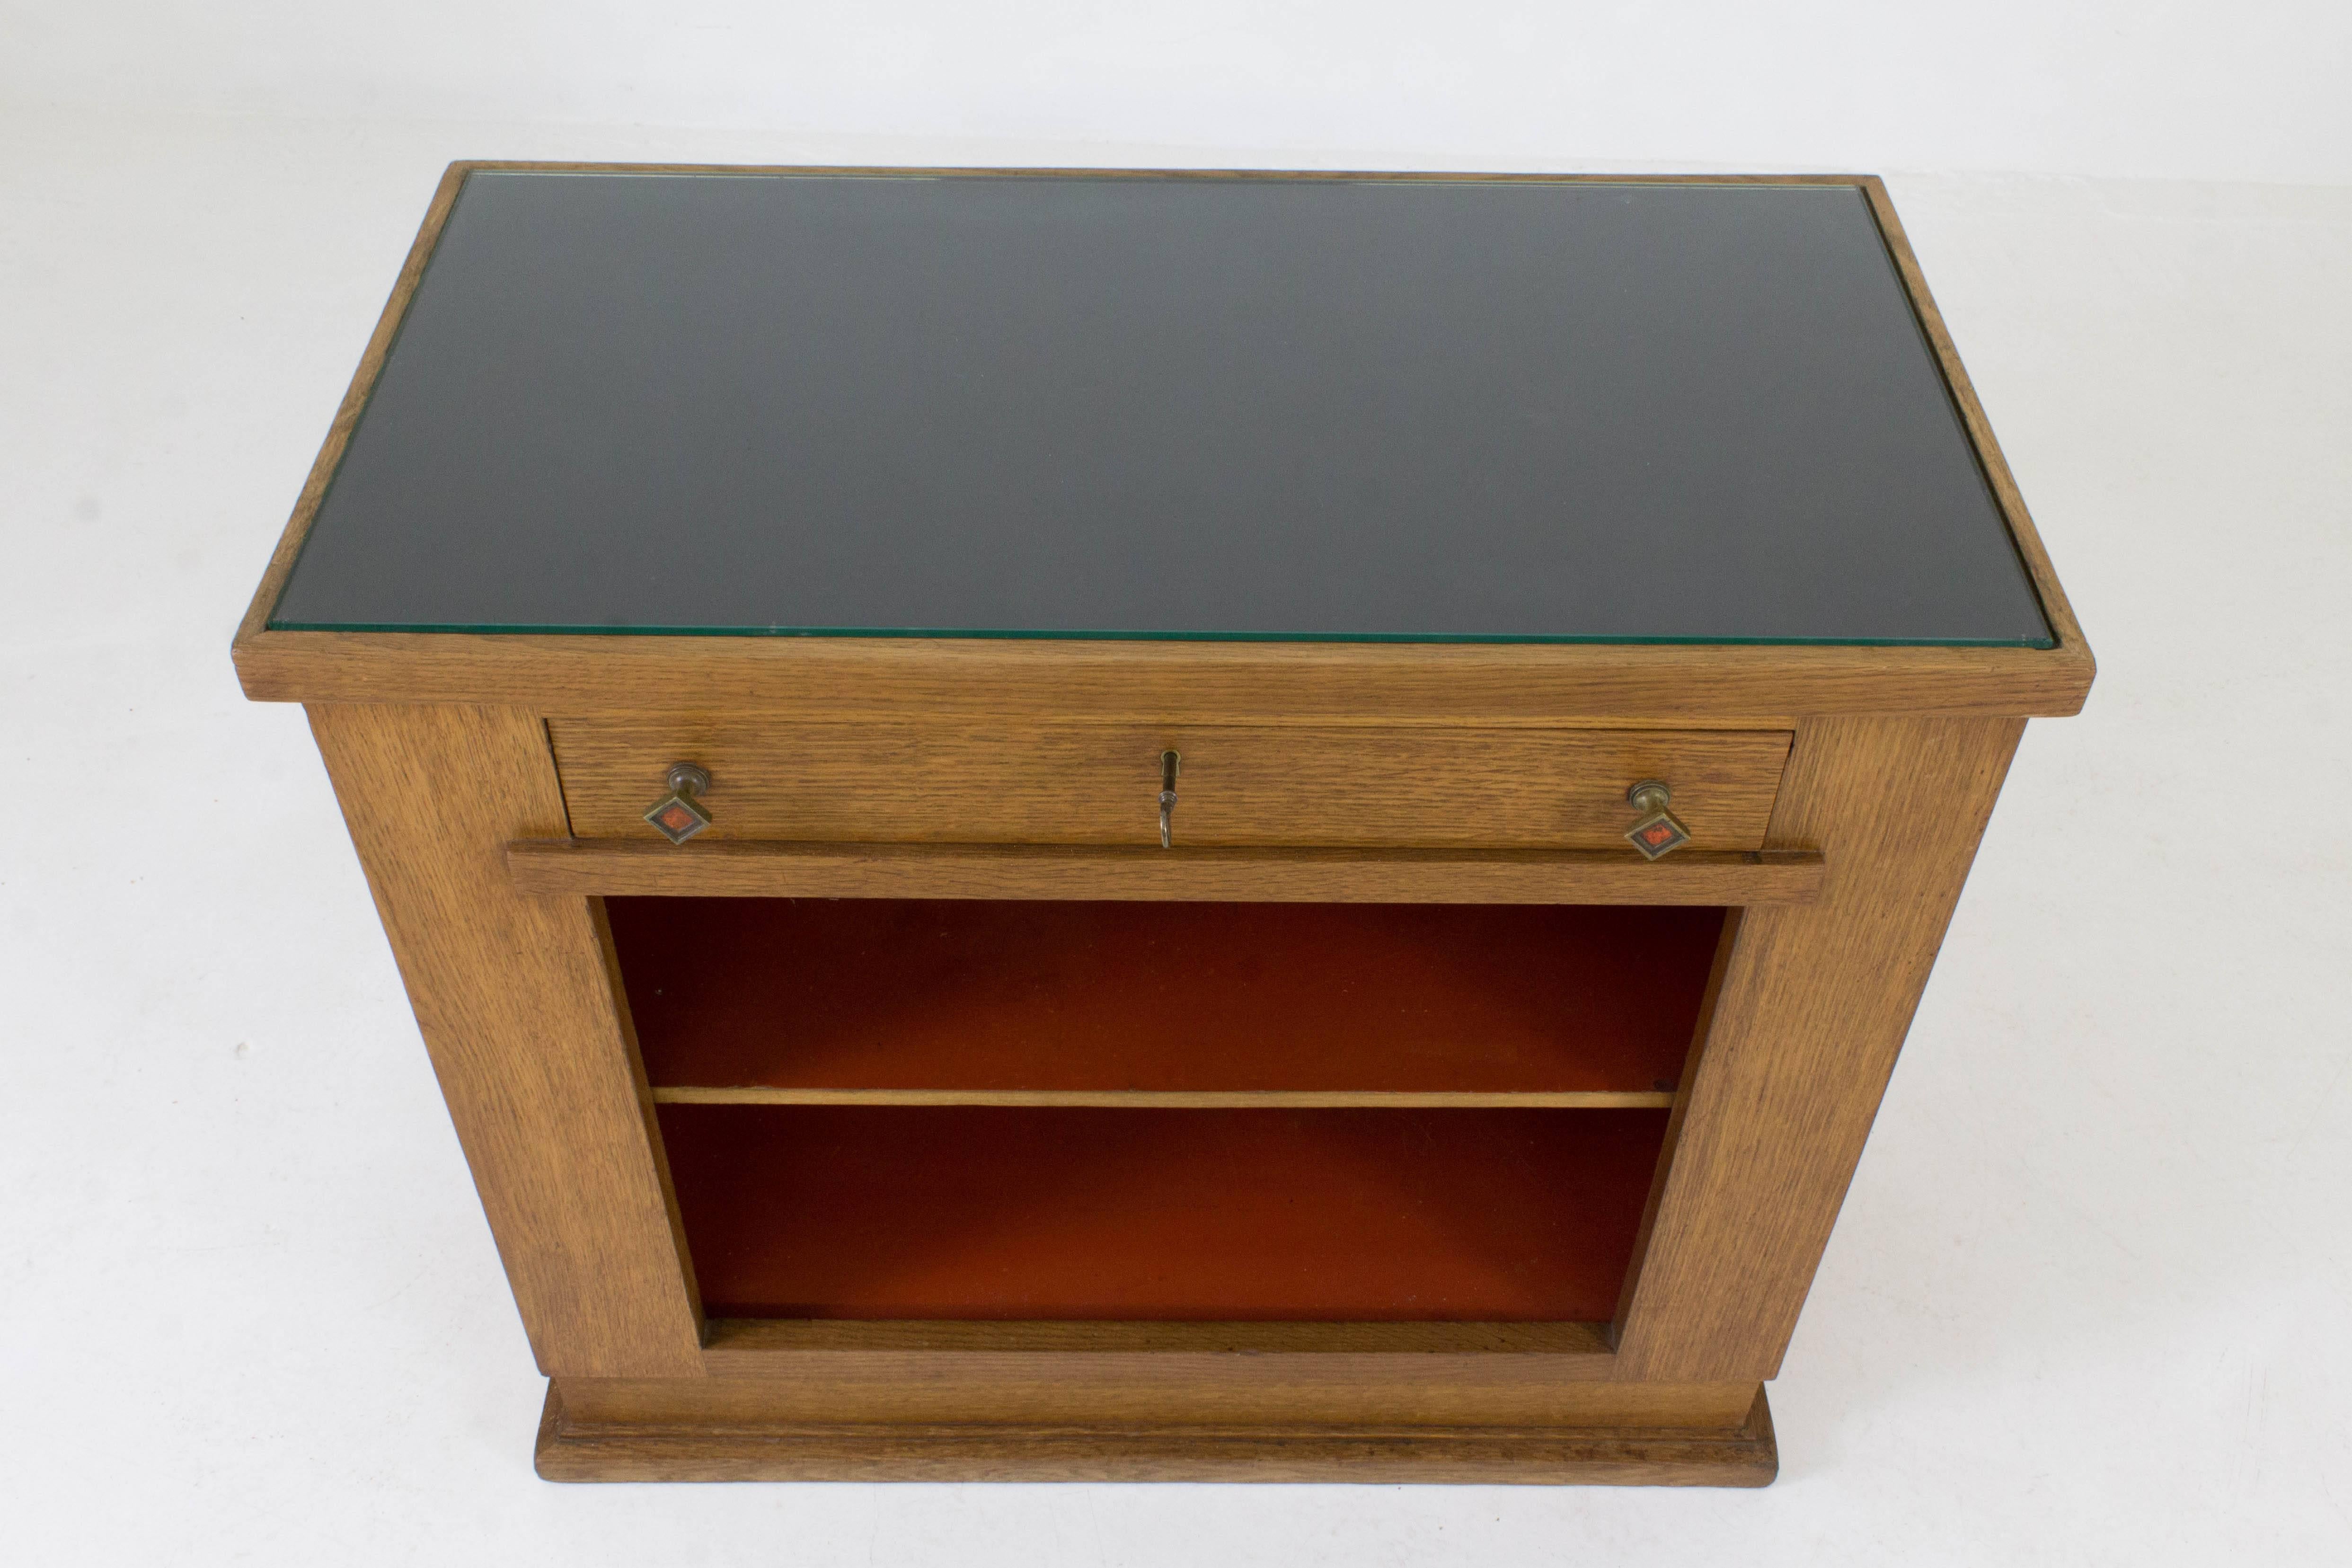 Early 20th Century Rare Art Deco Haagse School Tea Cabinet by H.Wouda for Pander, 1924